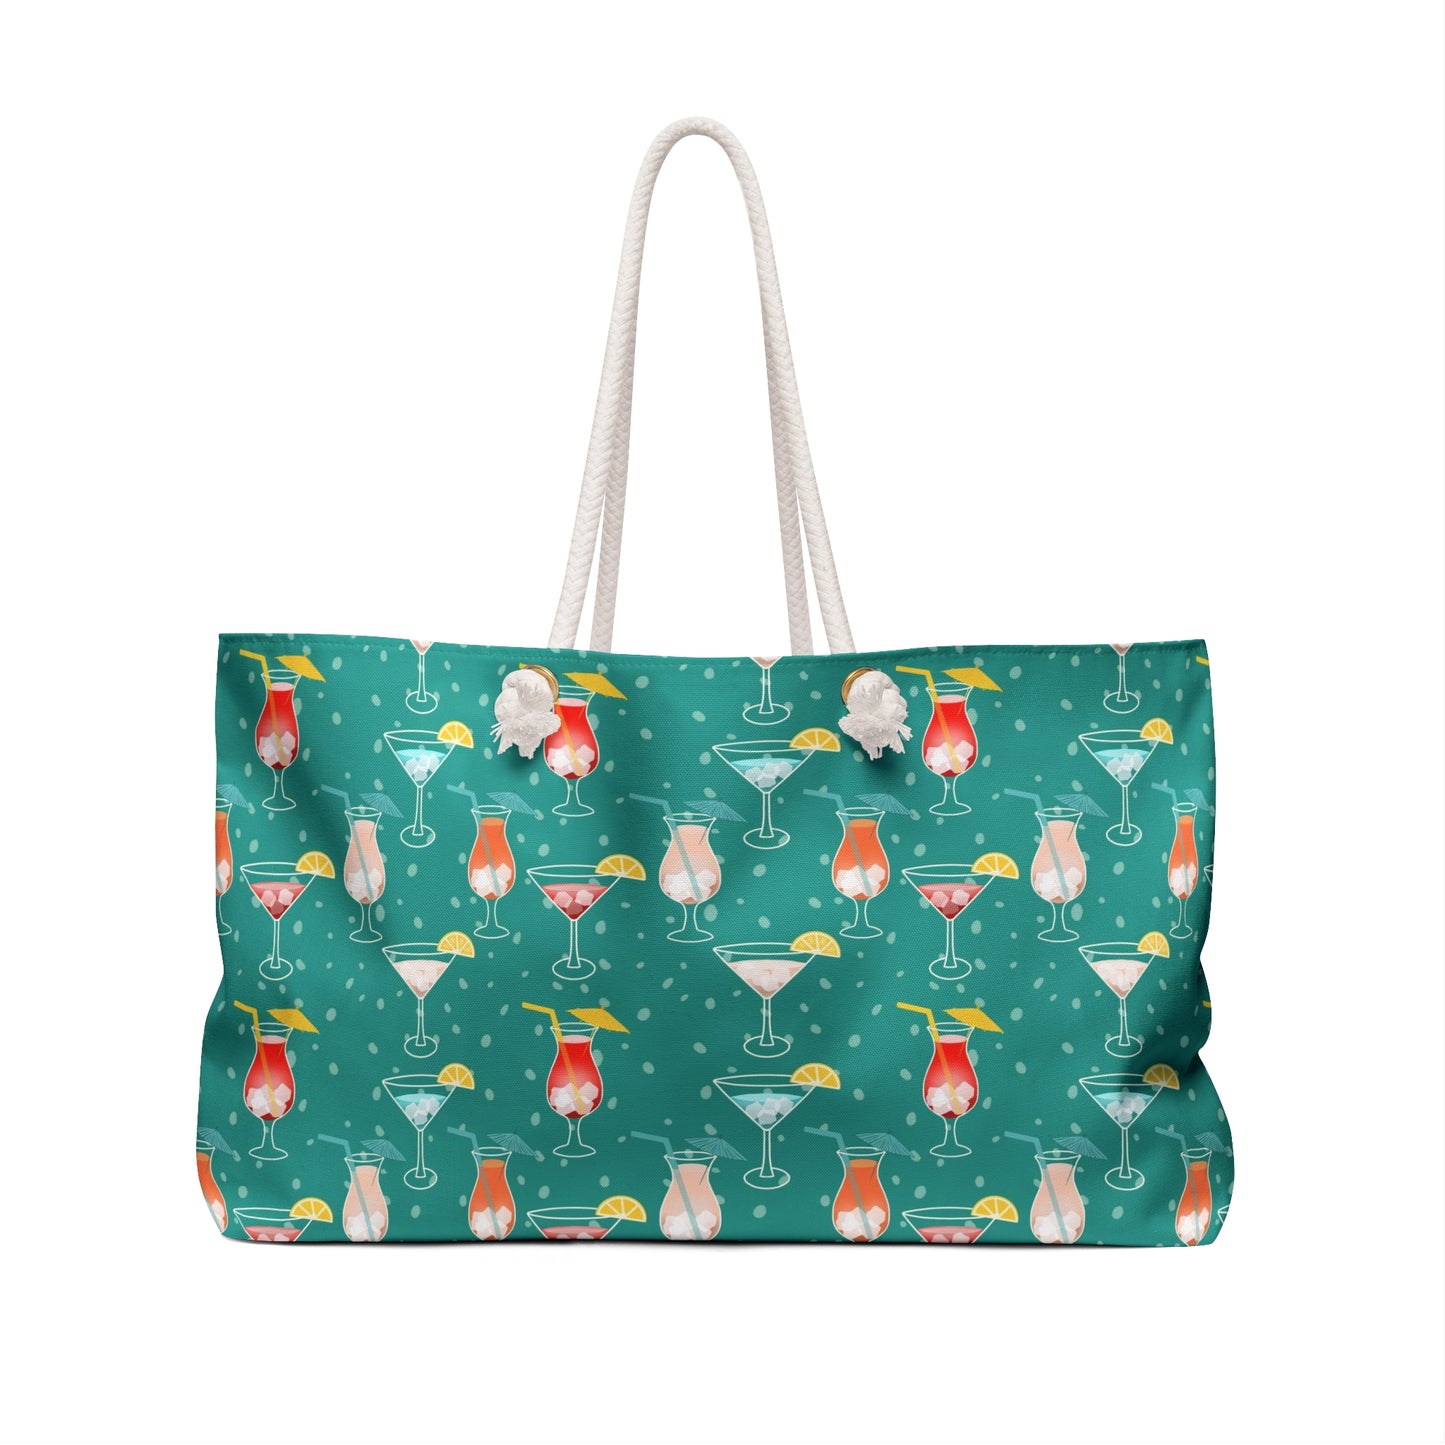 Cocktails Delight Weekender Tote Bag: Colorful, Garnished, and Stylish